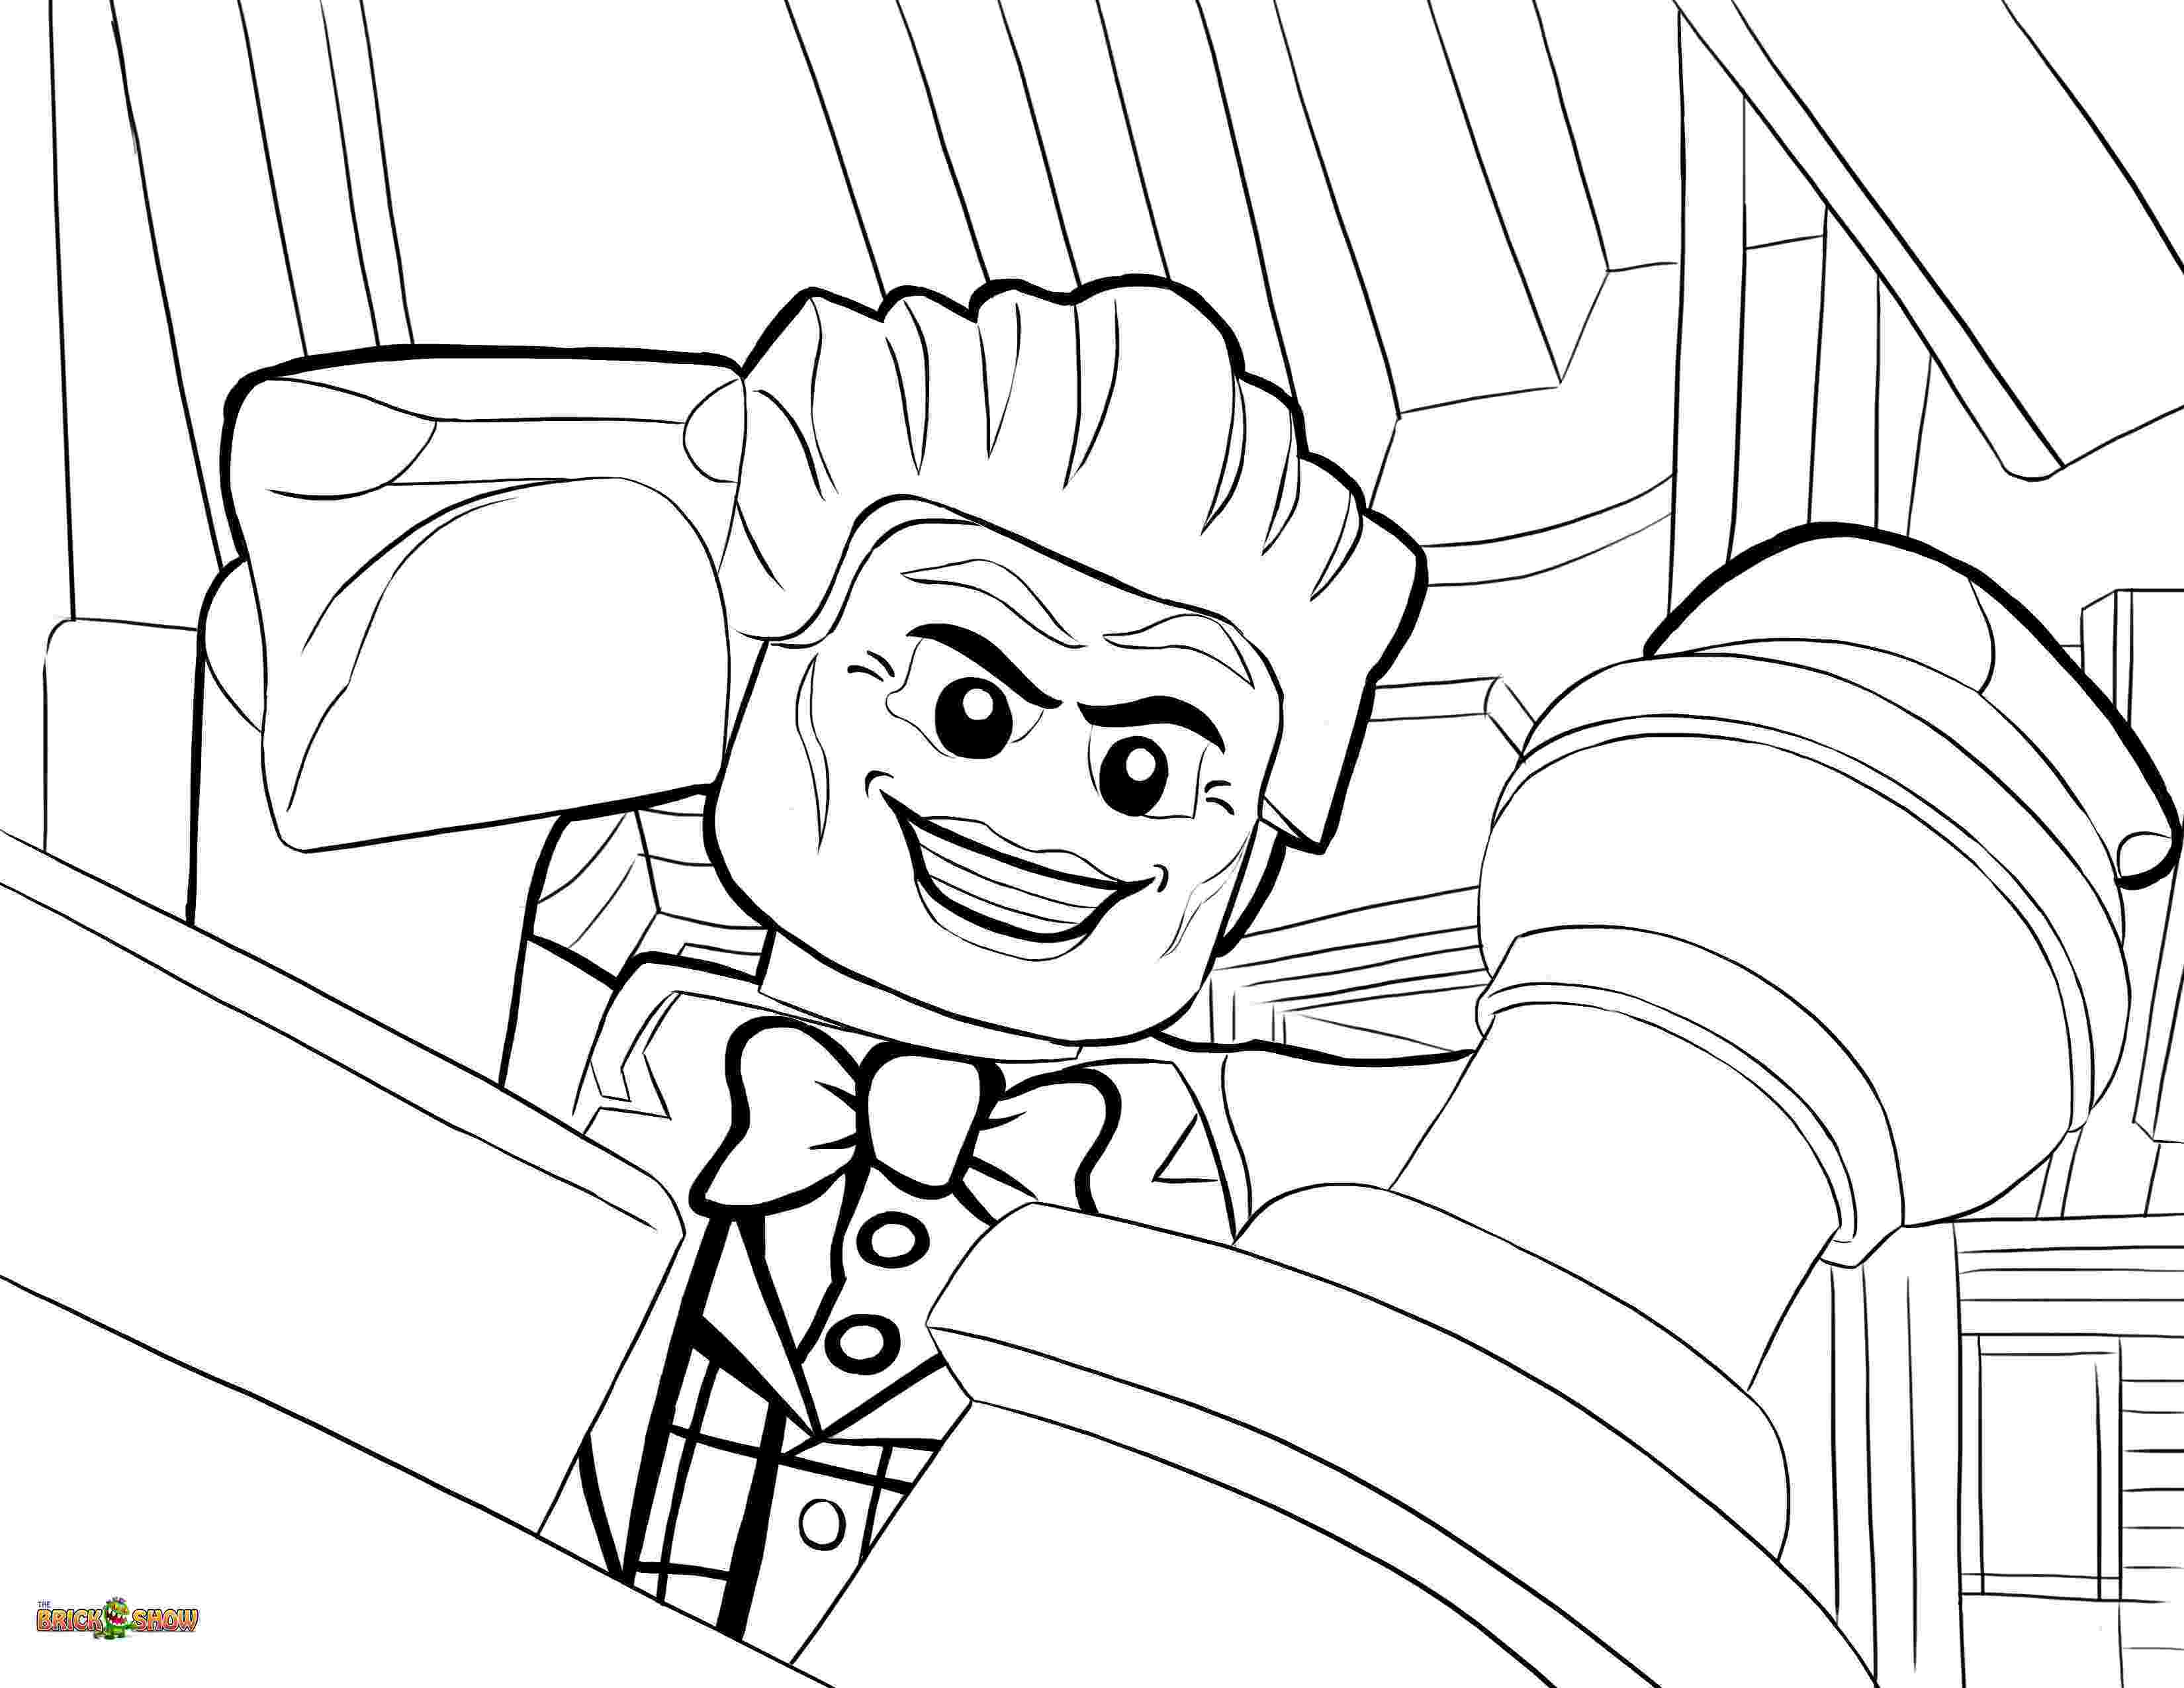 lego colouring sheet lego batman coloring pages to download and print for free sheet lego colouring 